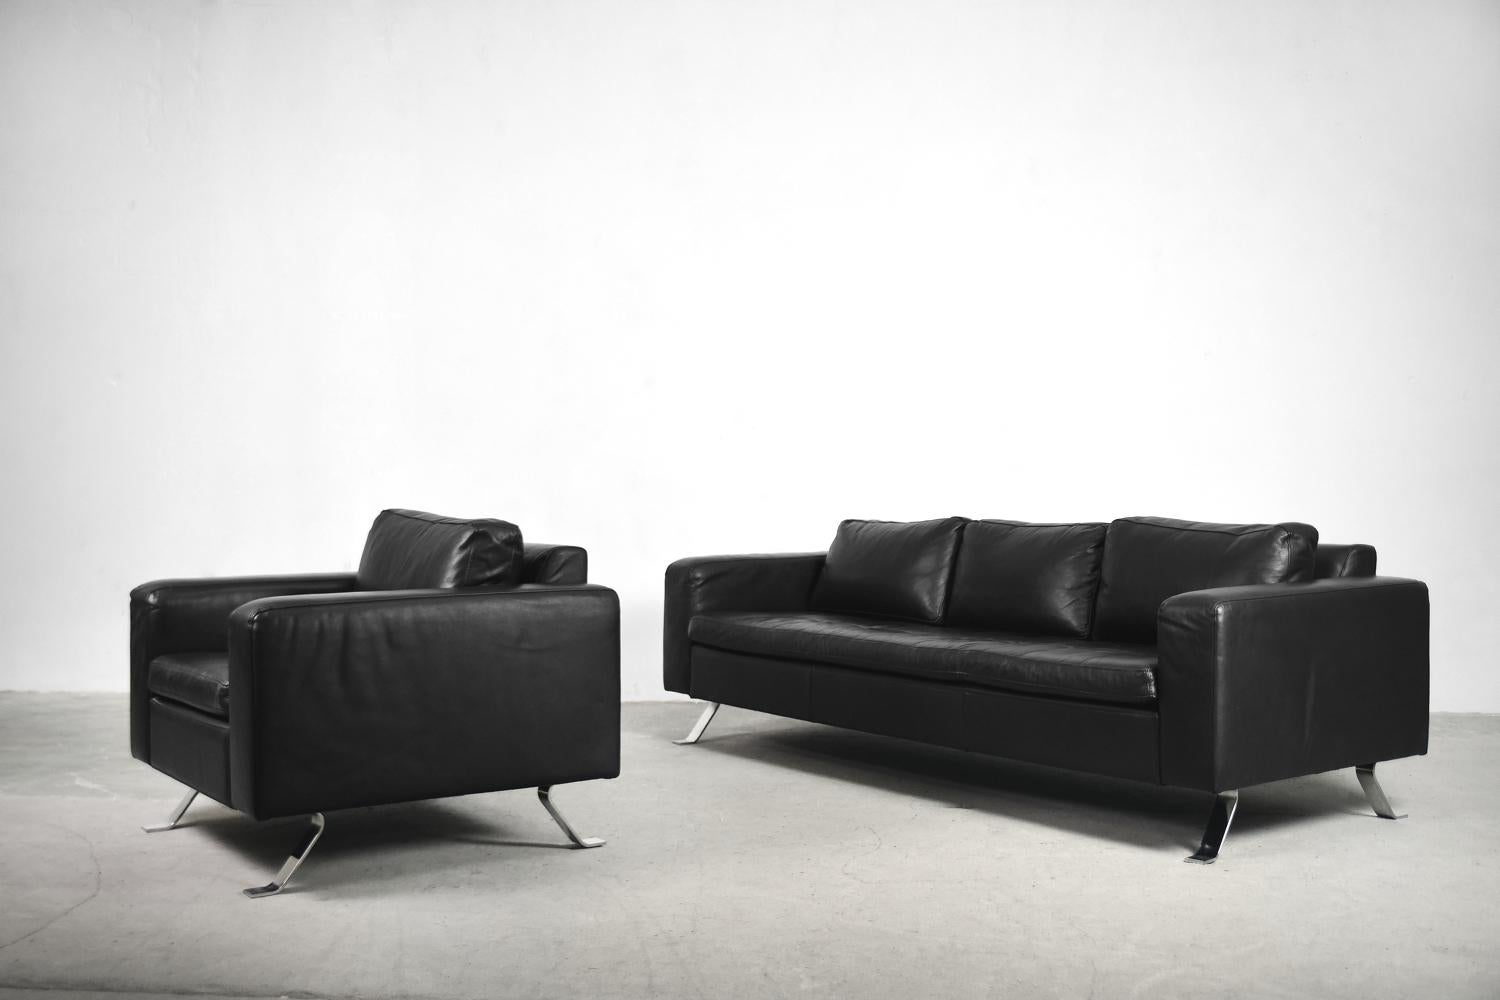 This Minimalist and elegant living room set was produced by Lind, a manufactory originally established in Denmark in 1965 and expanded to Canada in 1988. Lind furniture manufacture a wide selection of sofa integrating style, comfort and